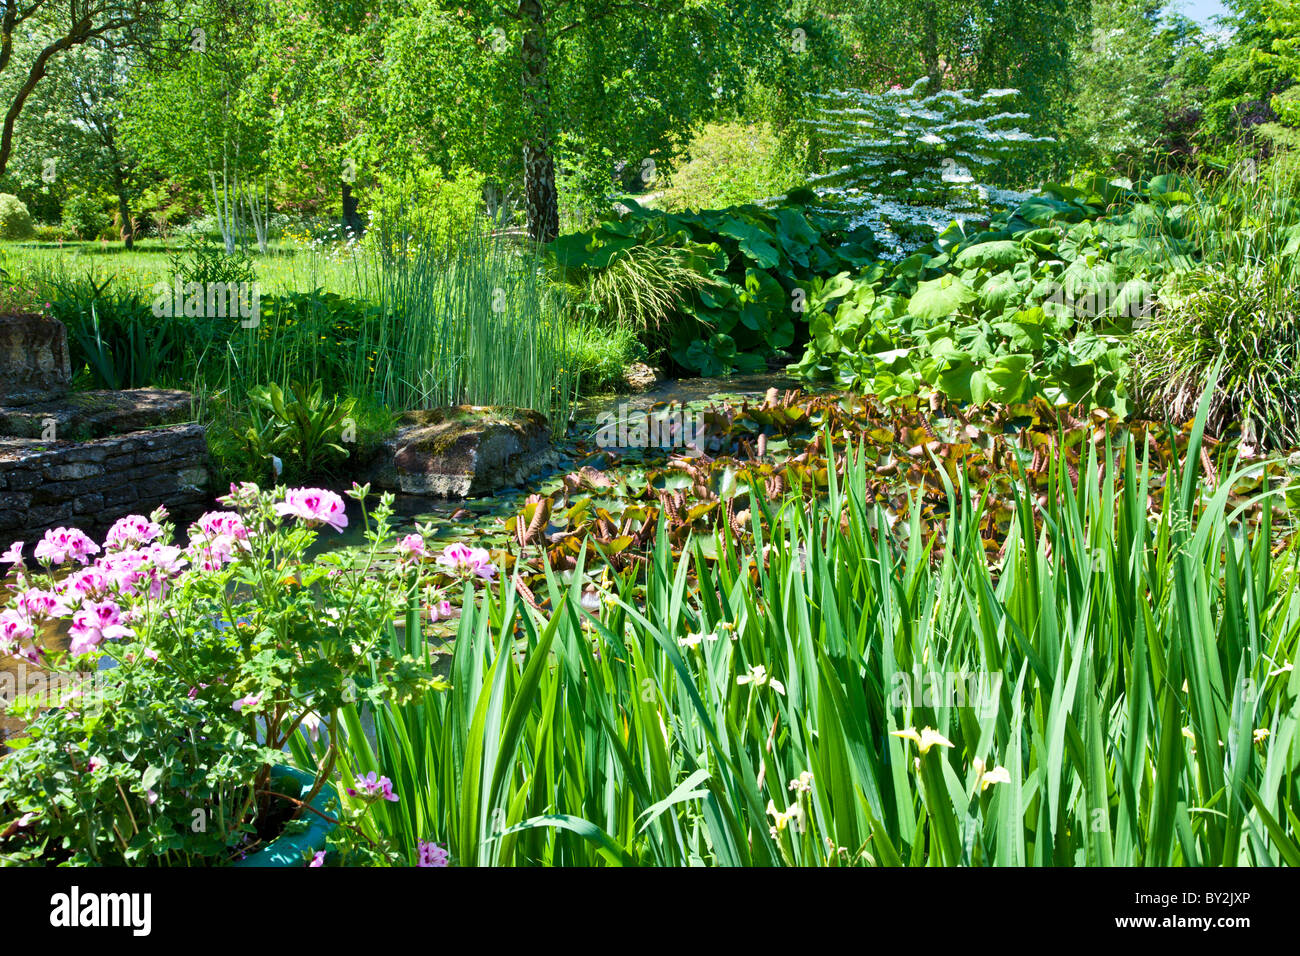 A lush and verdant garden pond surrounded by aquatic plants in an English country garden in summer Stock Photo